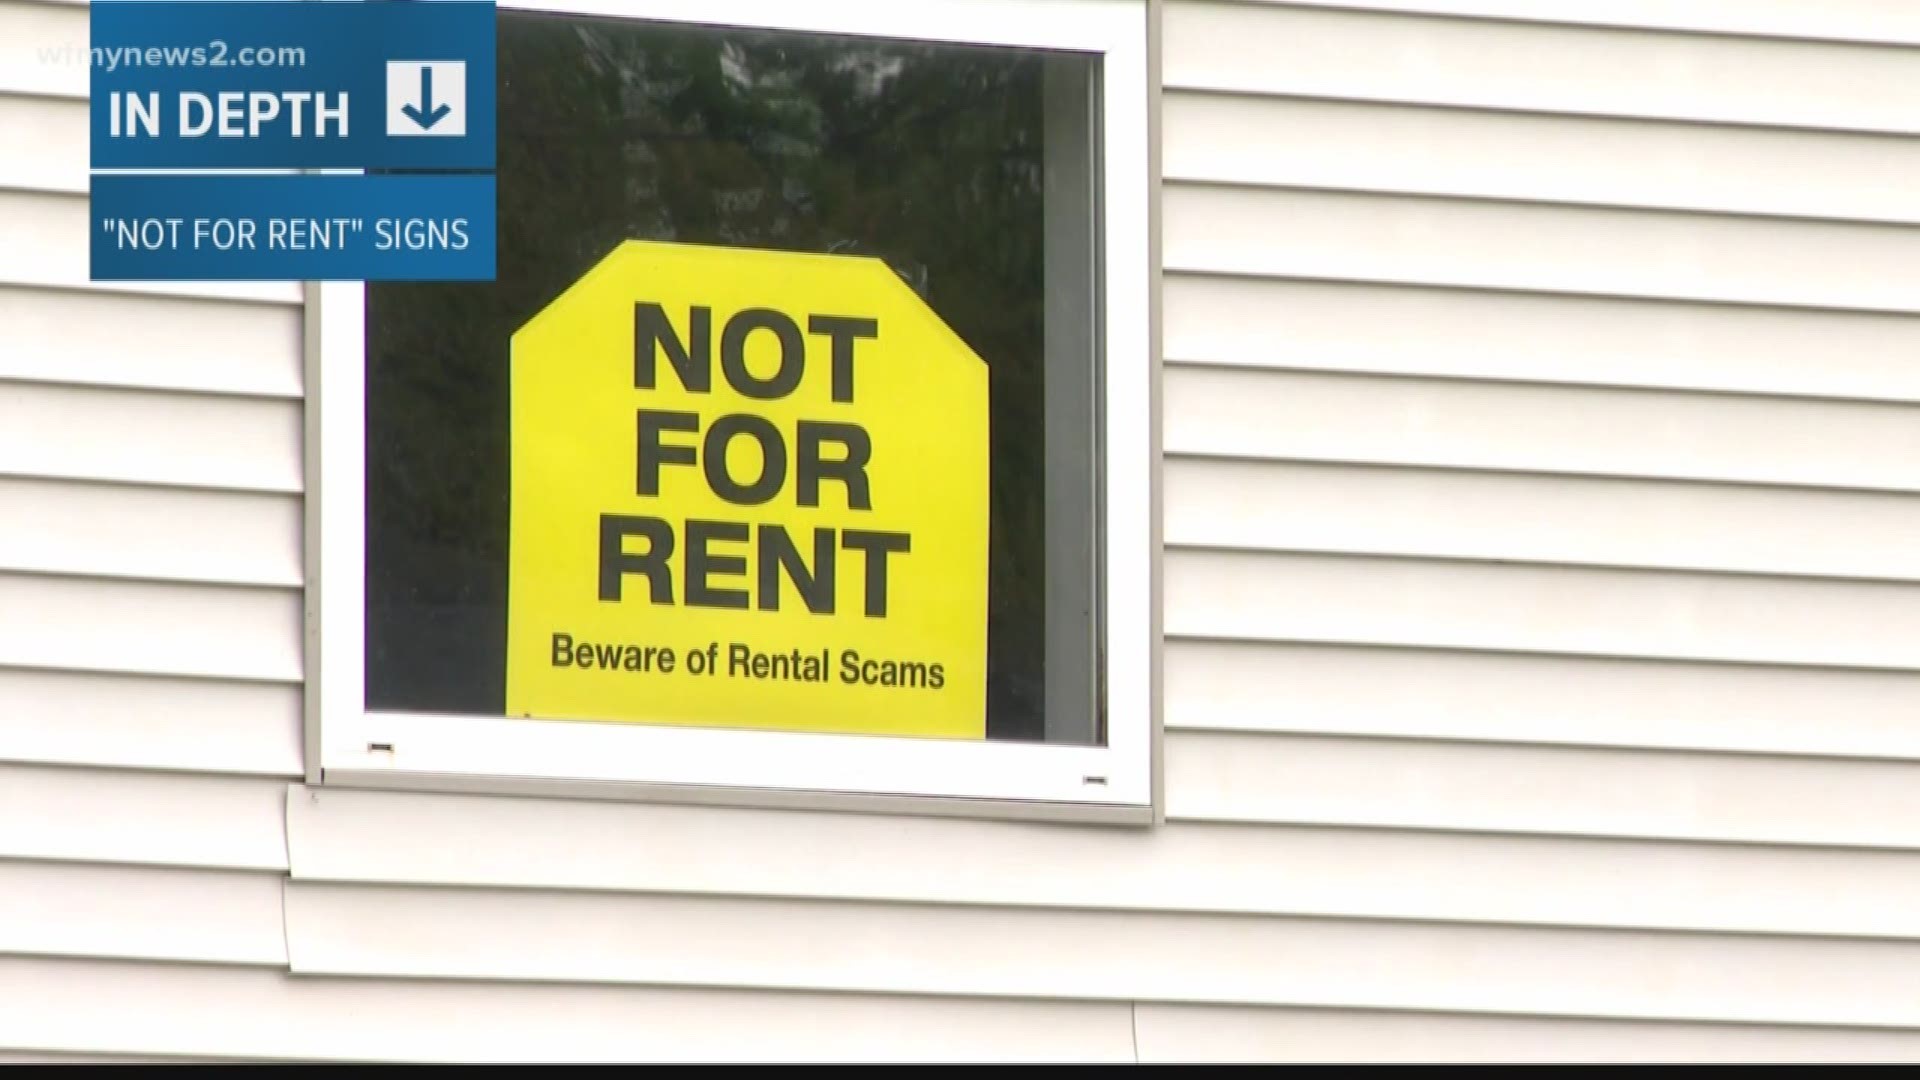 Home sellers are trying to help people avoid scams with these signs.